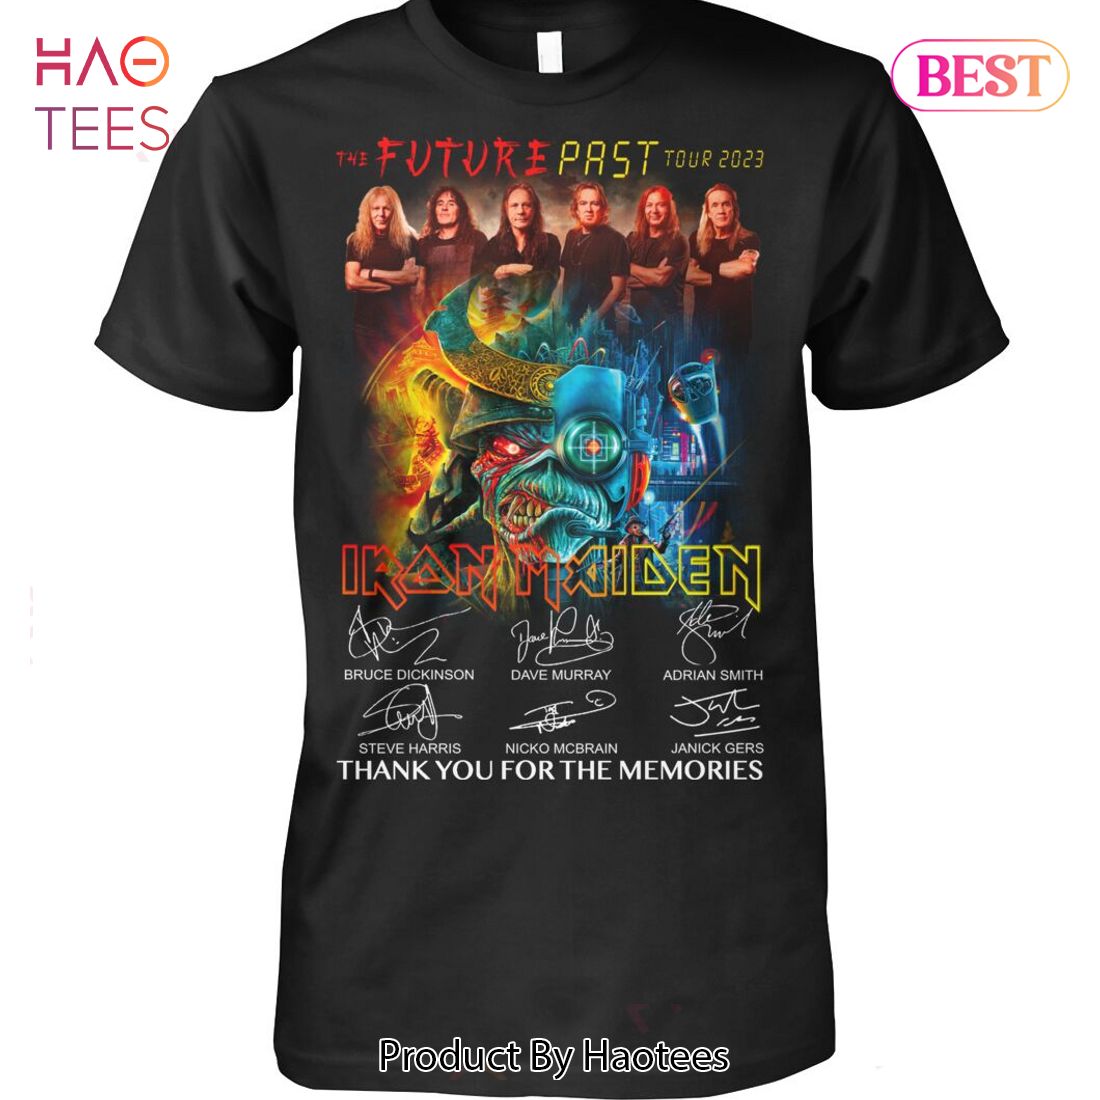 NEW The Future Iron Maiden Tour Thank You For The Memories Unisex T-Shirt